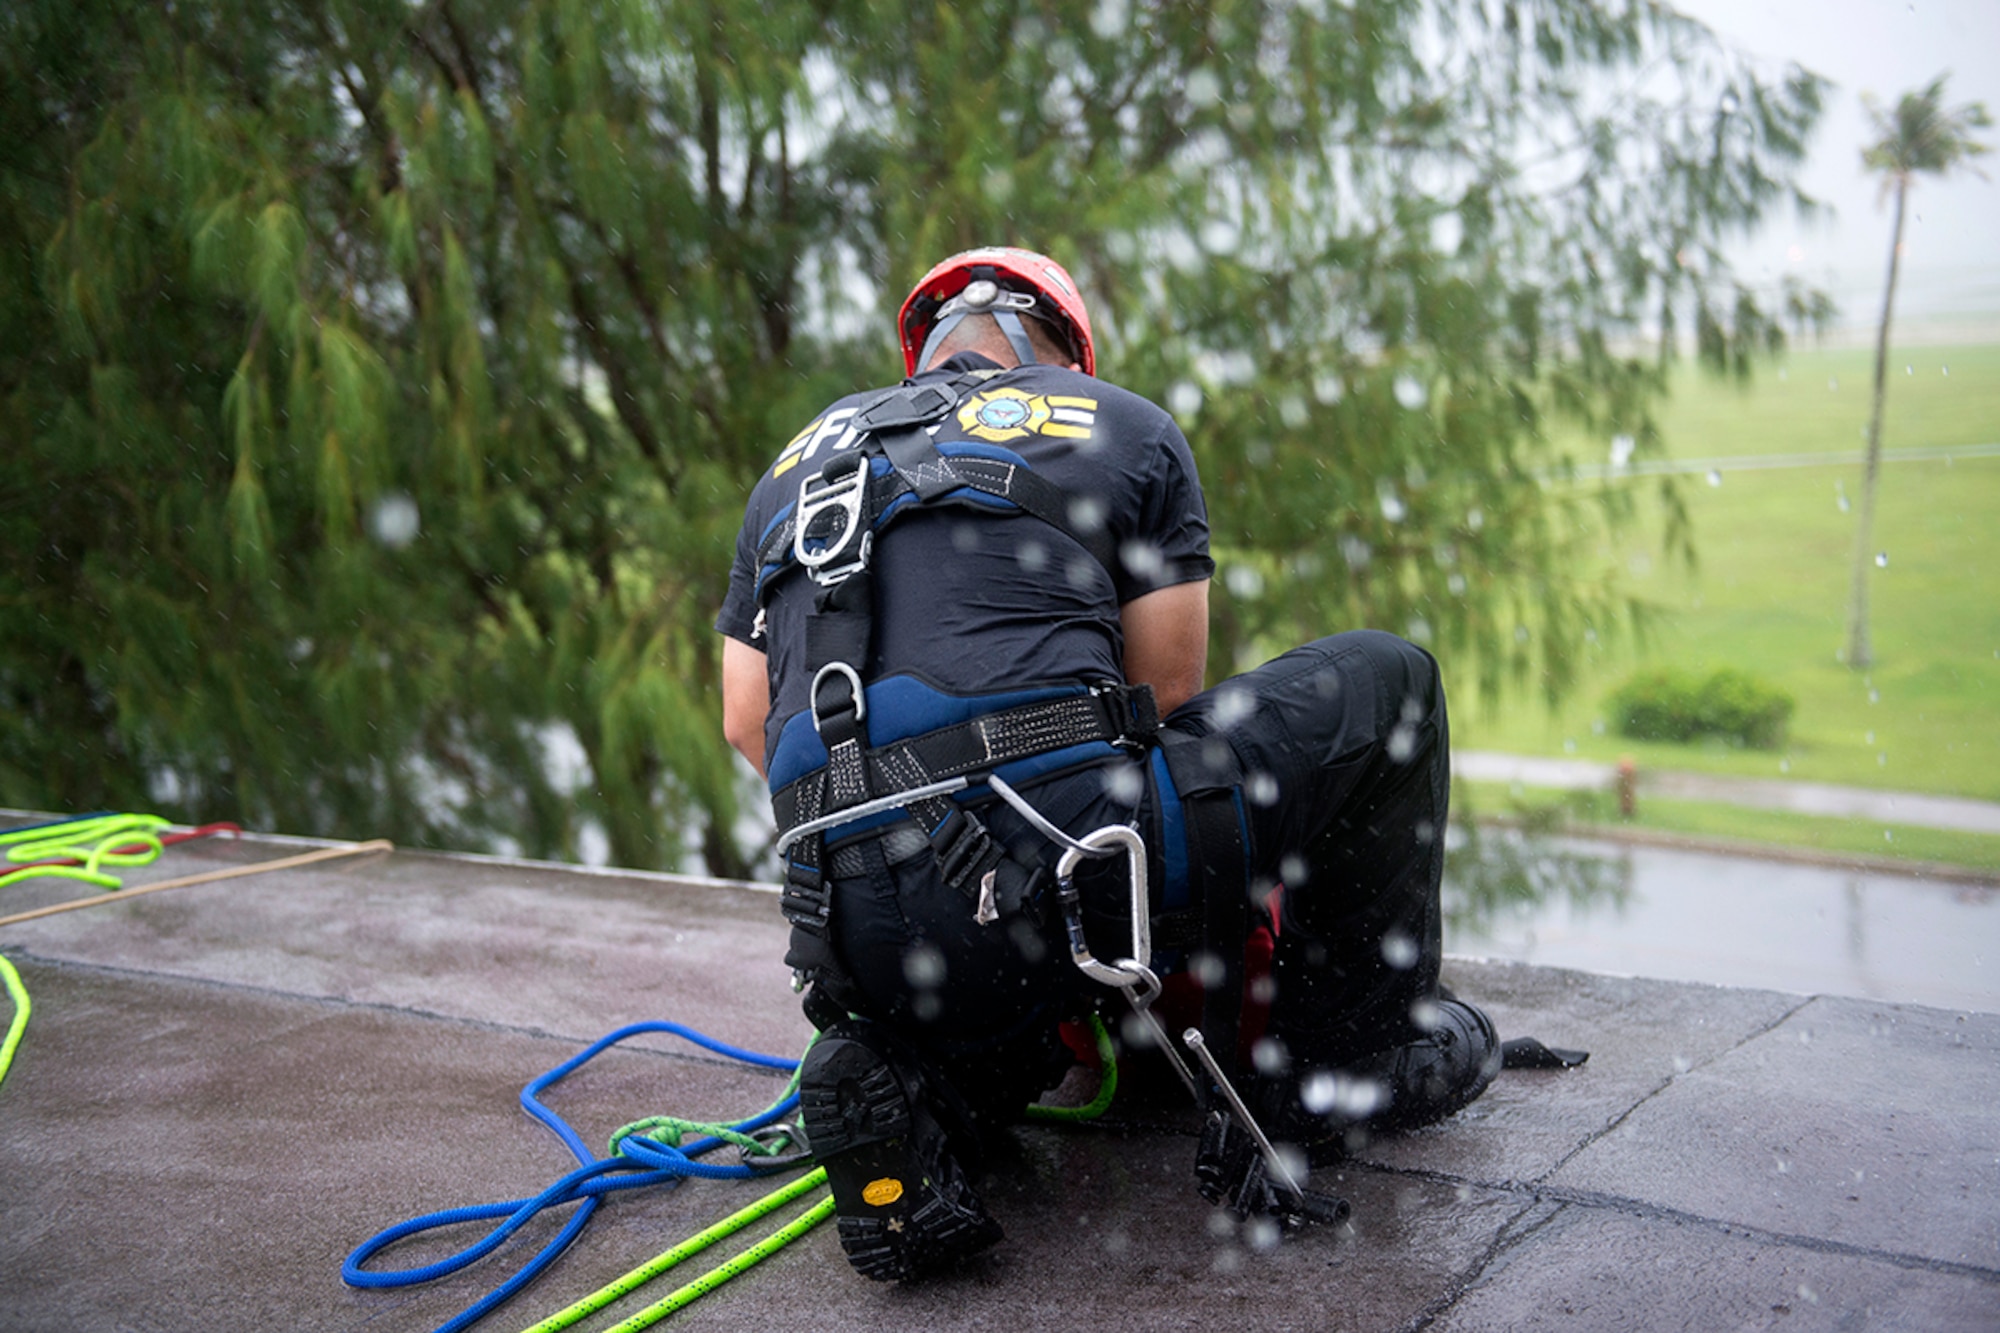 Ken Cruz, a Naval Base Guam firefighter, secures a rope to the edge to the roof in a downpour prior to rescuing a simulated victim during the Department of Defense Rescue Technician course event Sept. 16th, 2014, on Andersen Air Force Base, Guam. Thirteen firefighters from Andersen, Naval Base Guam and the Guam Fire Department attended the highly specialized training to learn elevated and confined space rescues. (U.S. Air Force photo by Tech. Sgt. Zachary Wilson/Released)